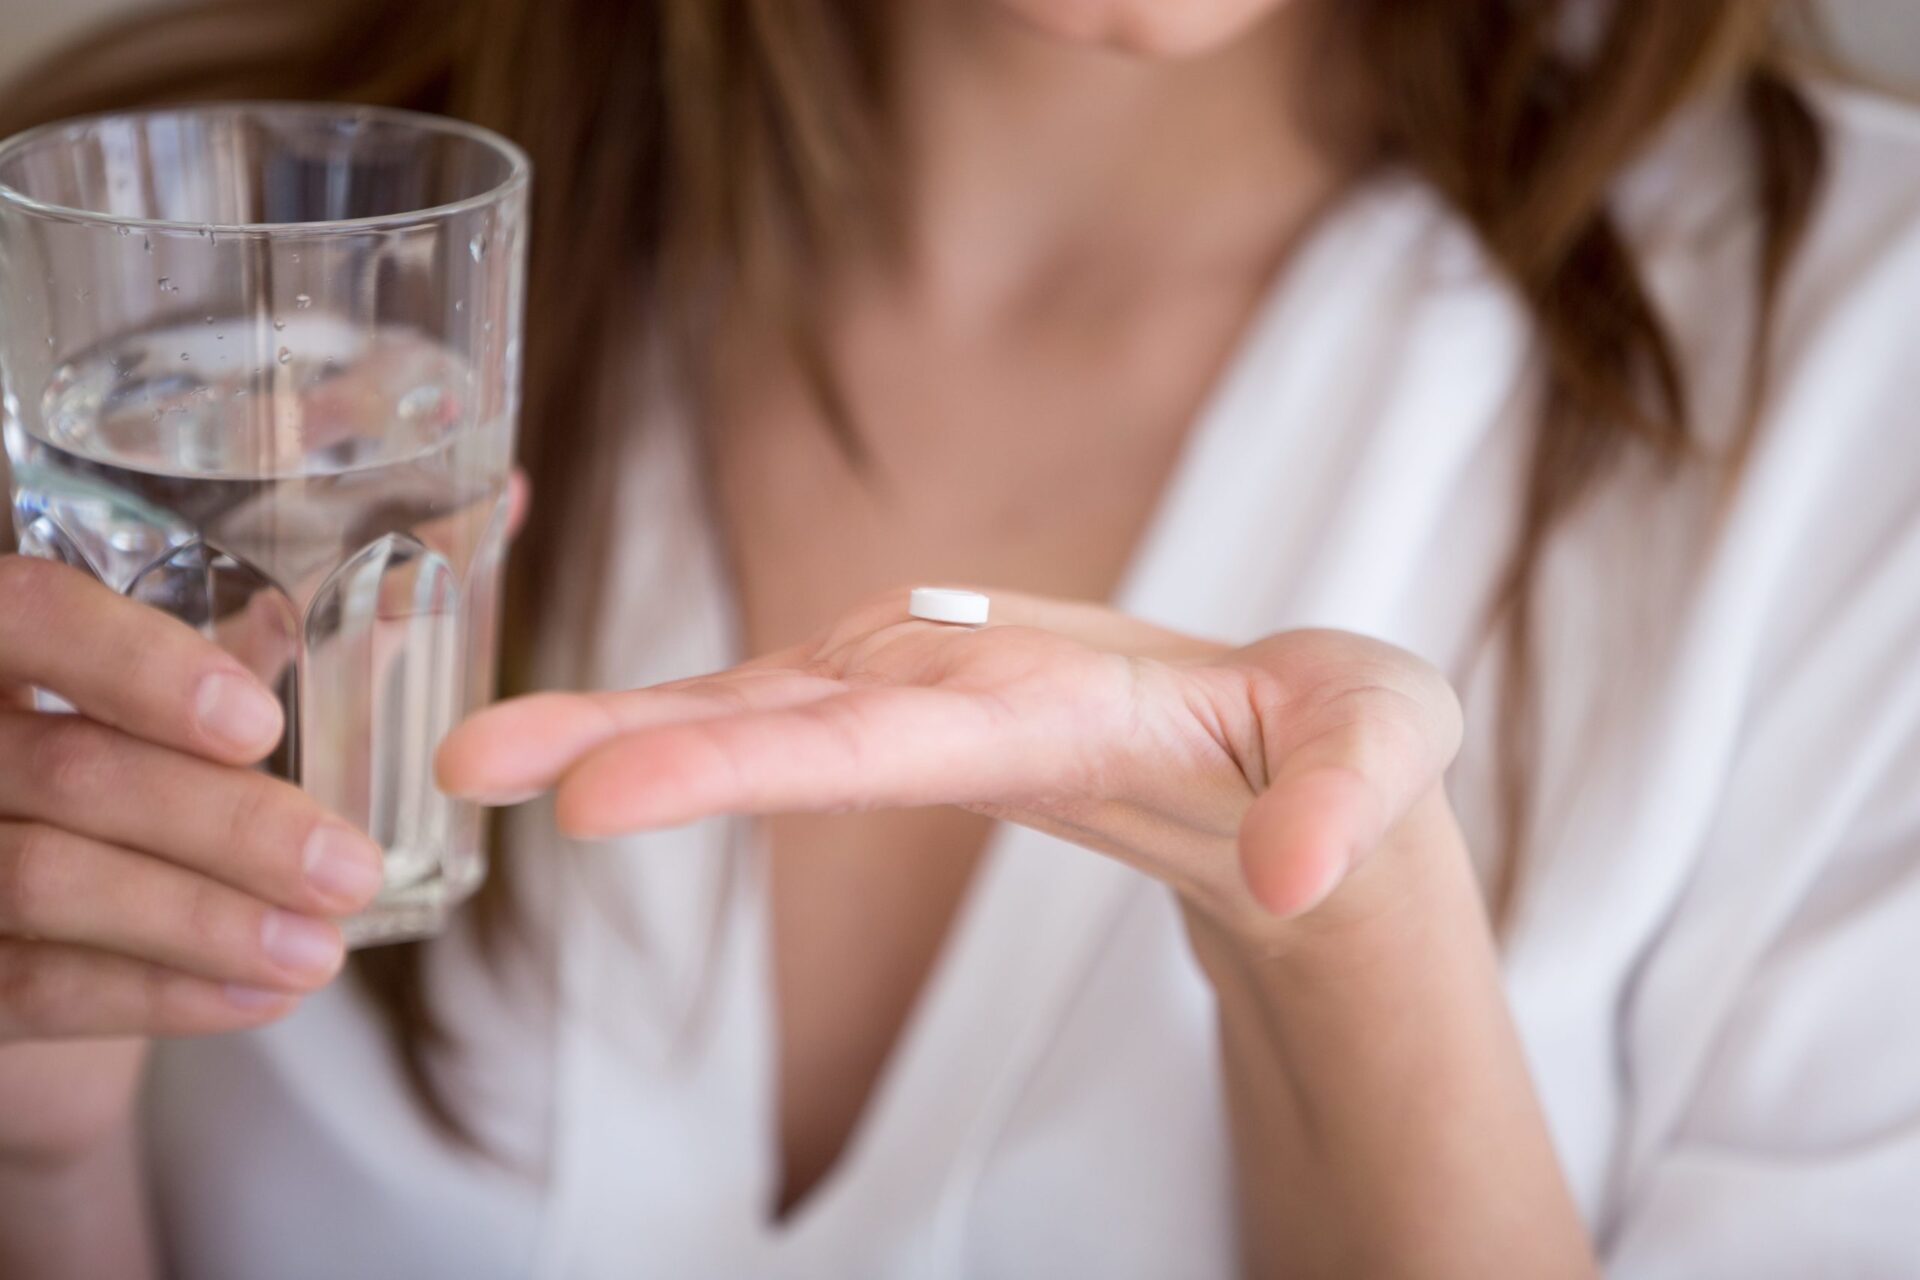 A woman wondering: Can you overdose on sleeping pills?